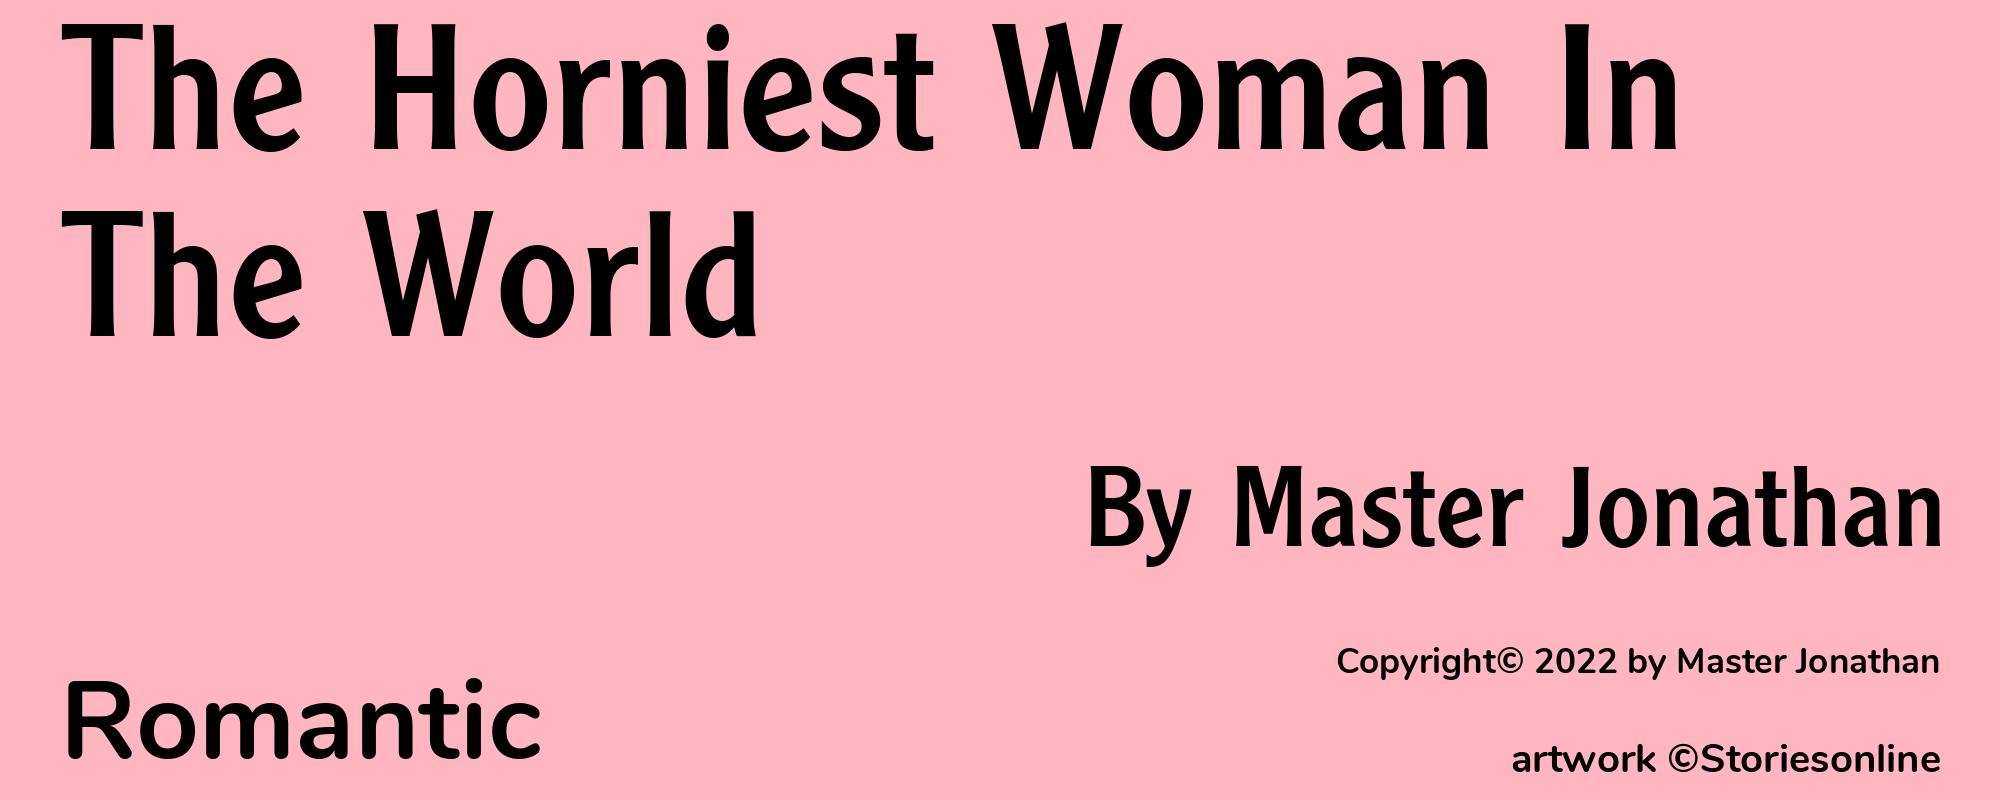 The Horniest Woman In The World - Cover